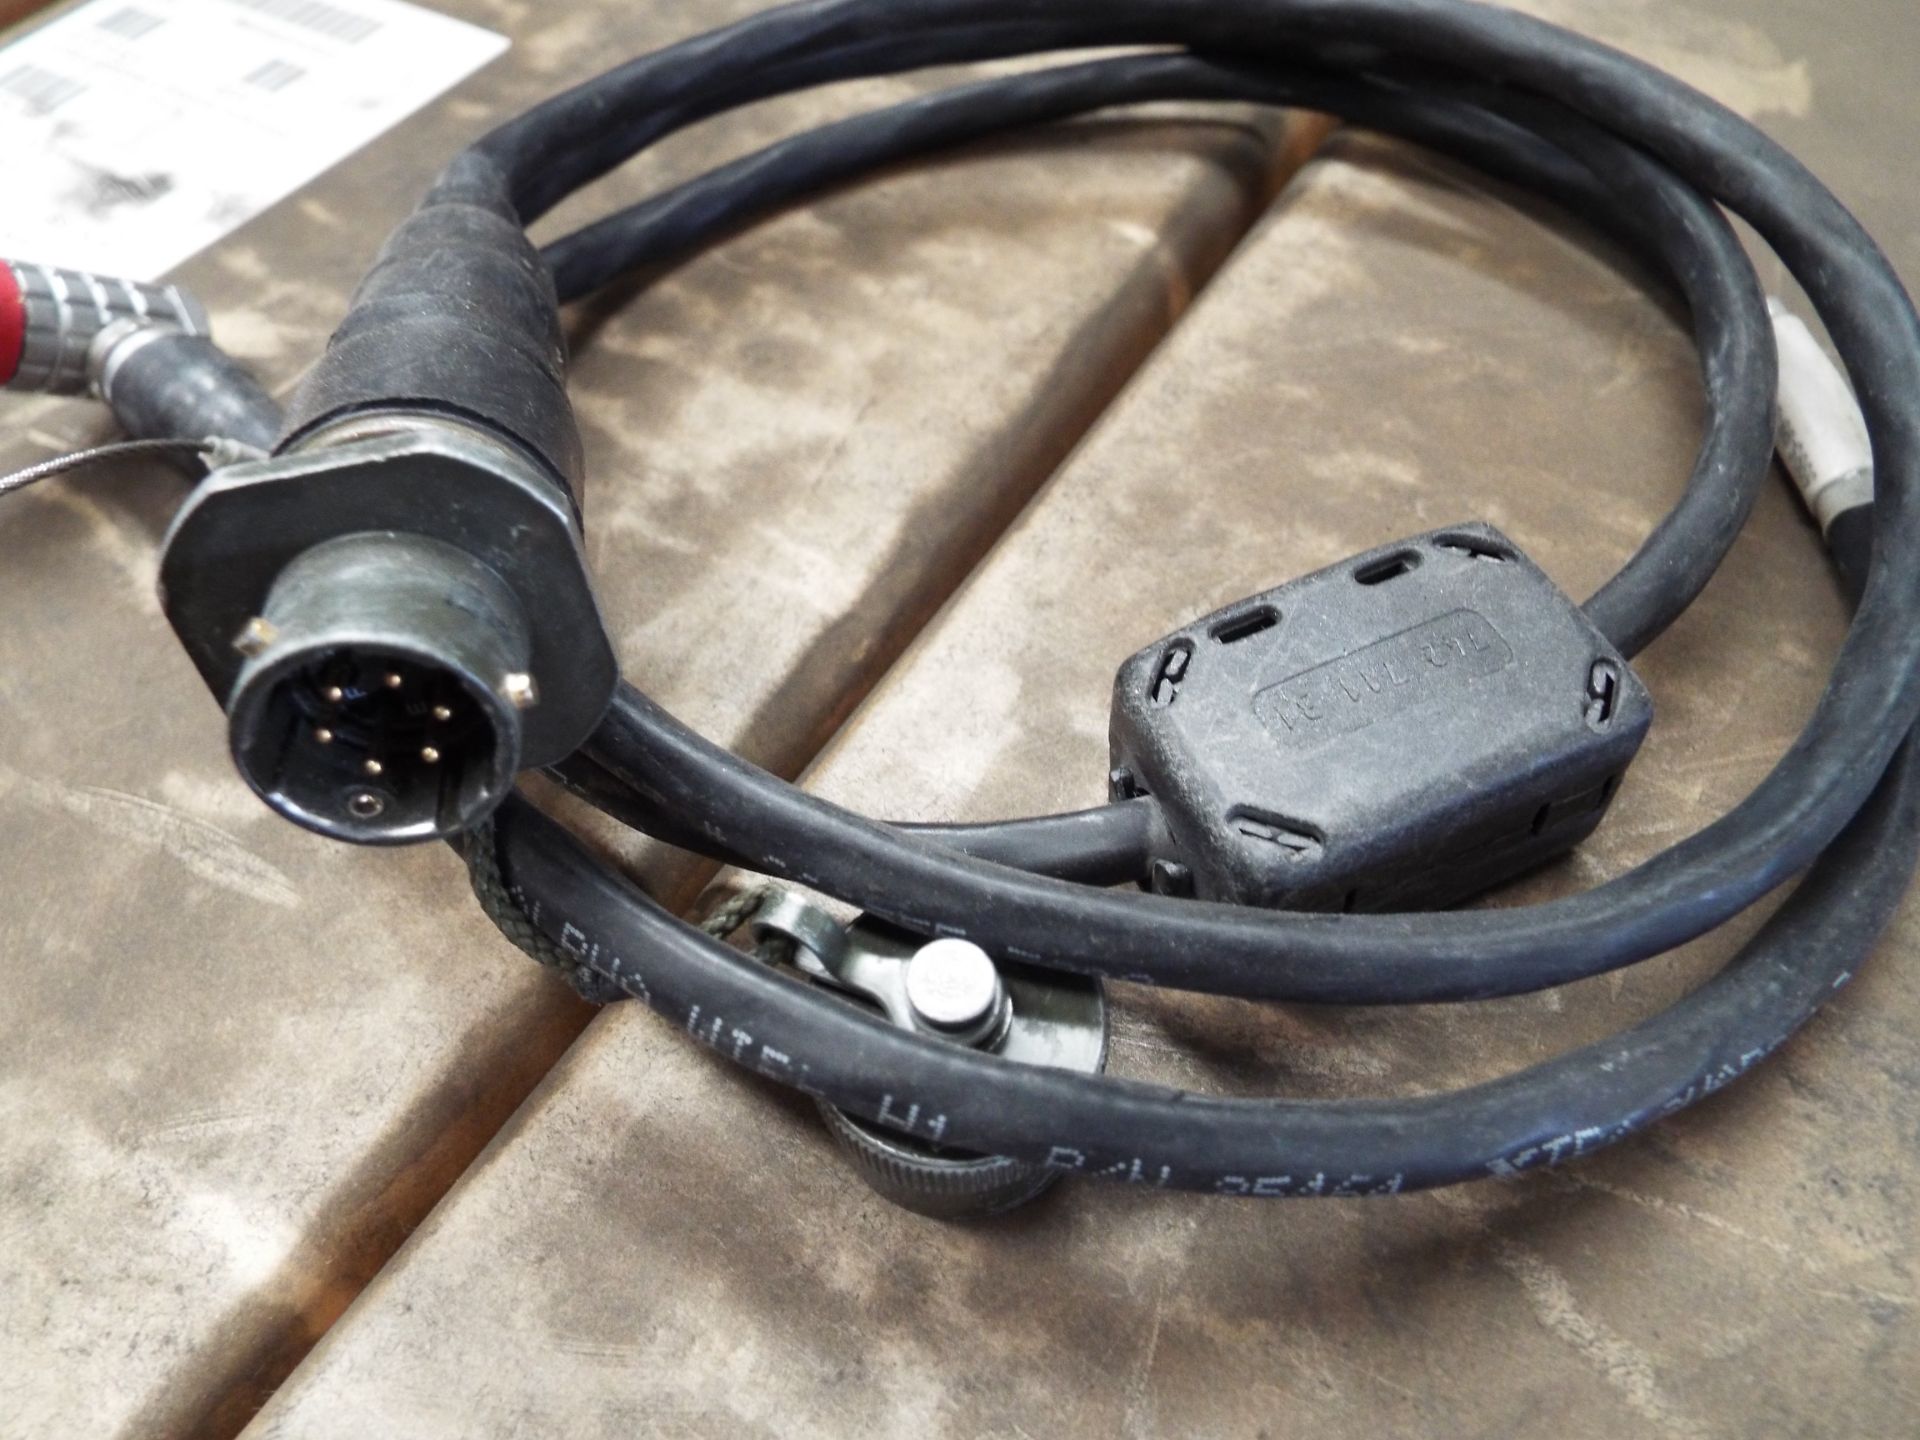 14 x Military Laptop Adaptor Cables - Image 2 of 4